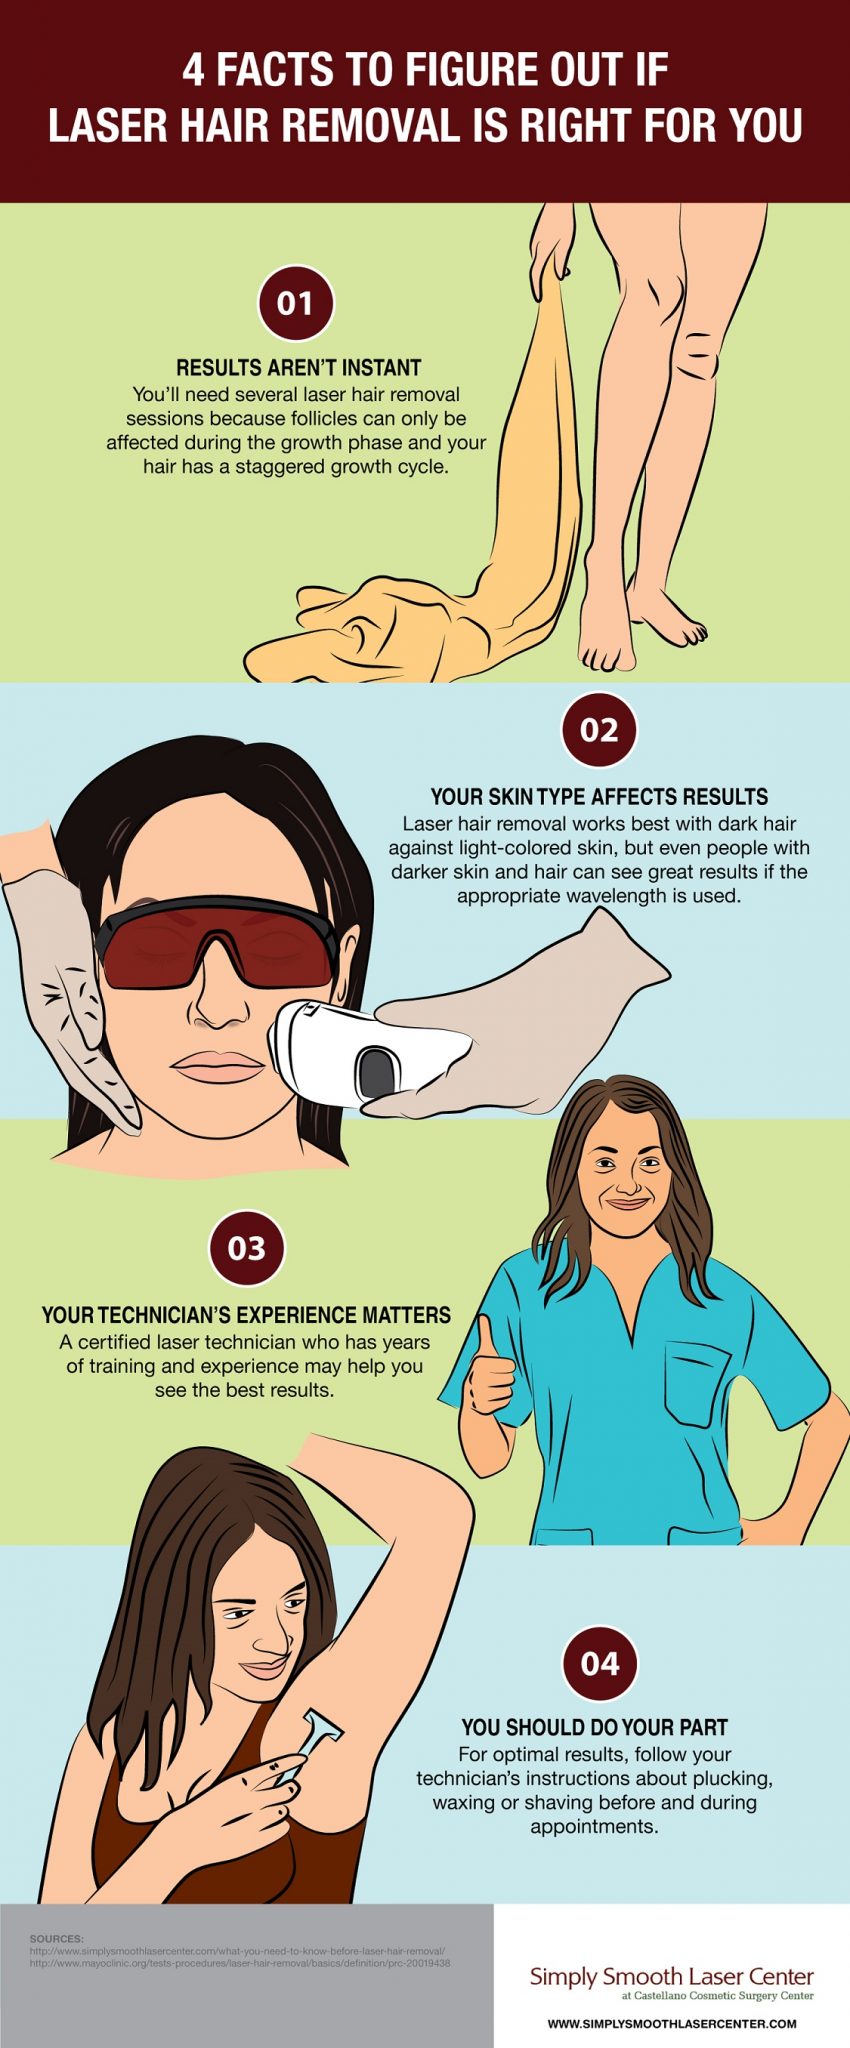 4 Facts to Find Out If Laser Hair Removal Is Right for You [Infographic]